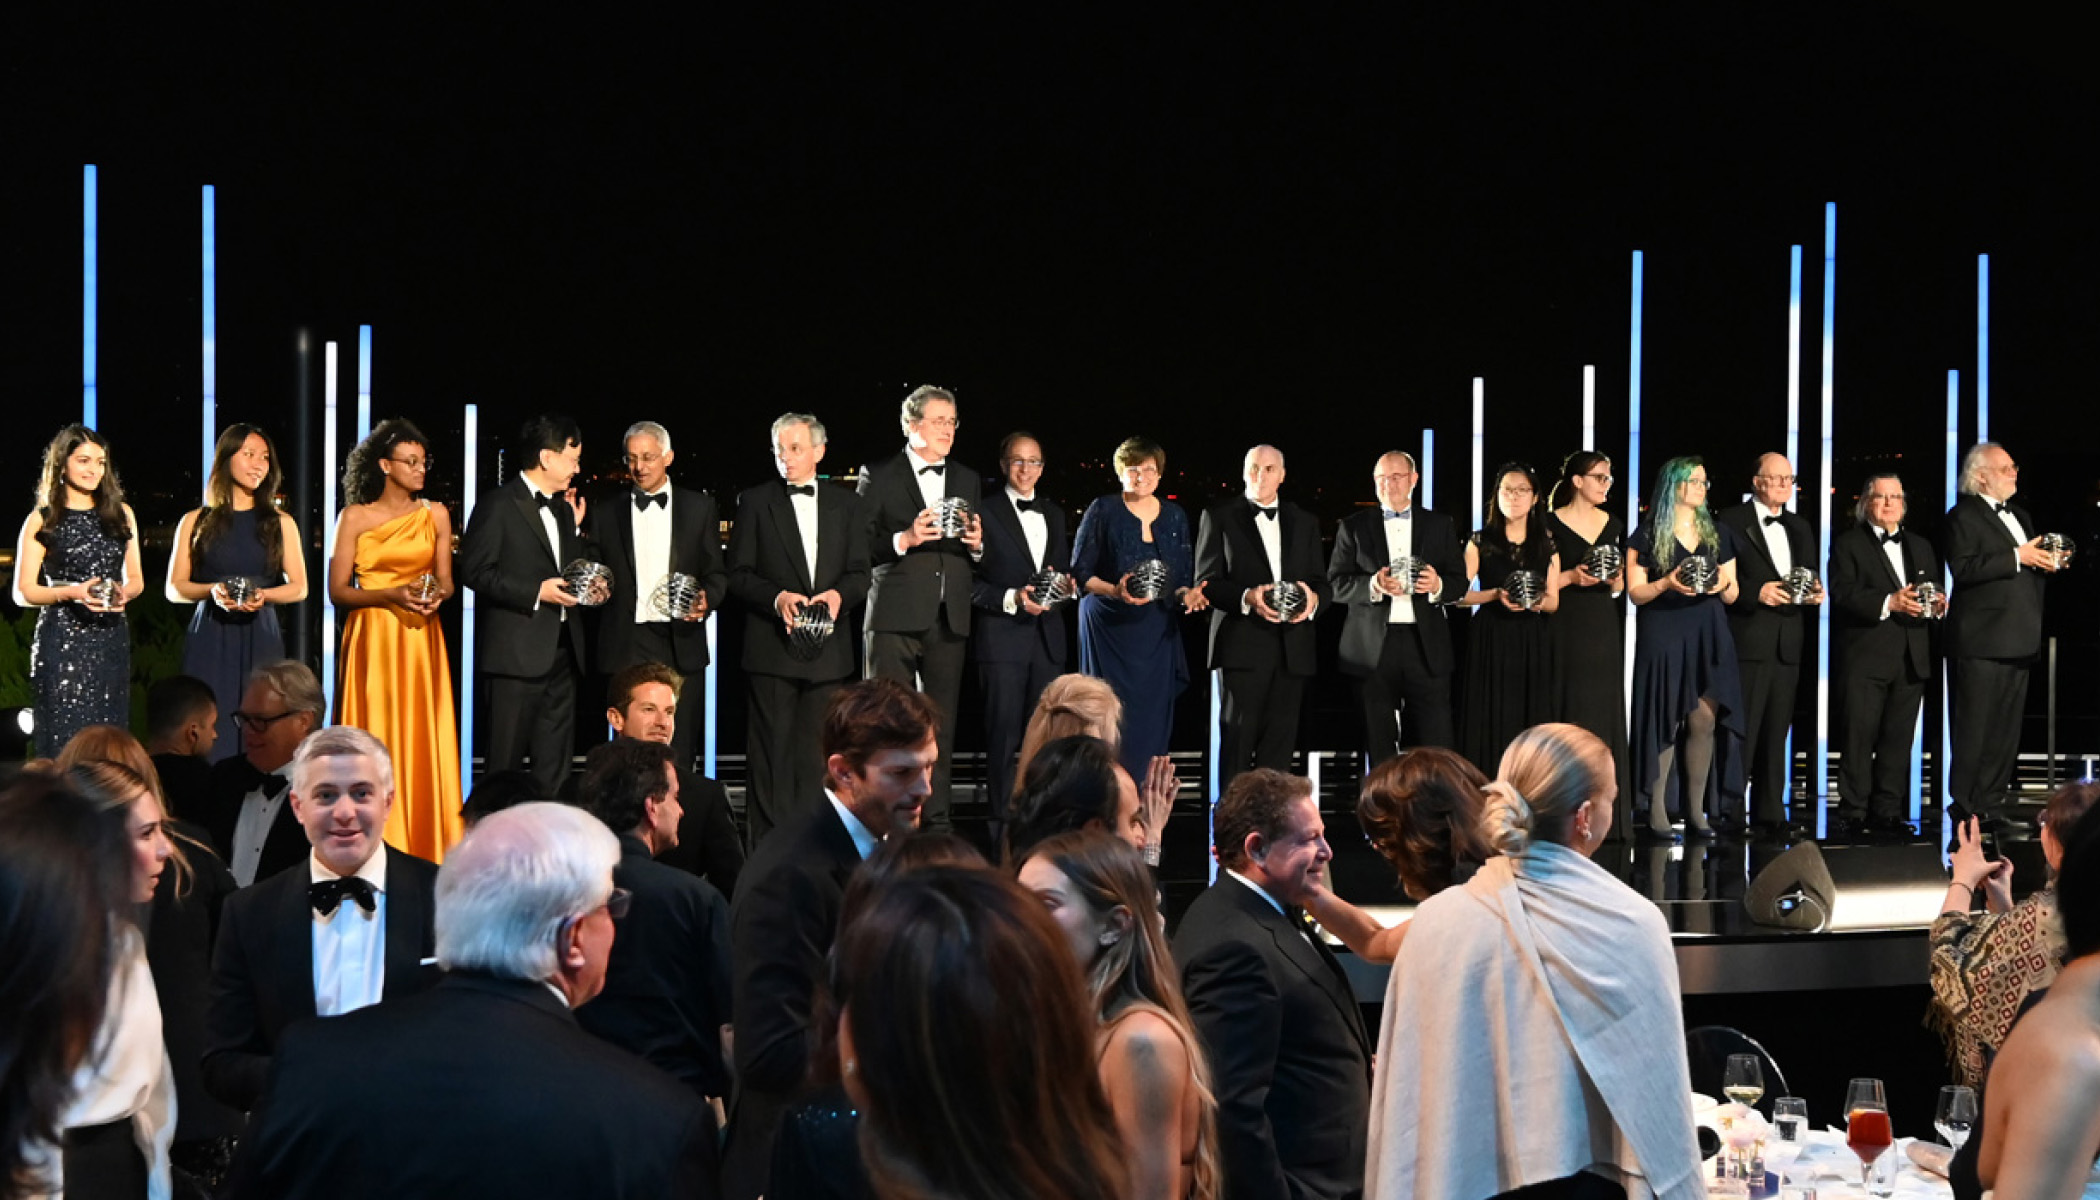 A large group of people stand onstage holding a spherical award in front of a crowd at the 9th annual Breakthrough Prize ceremony